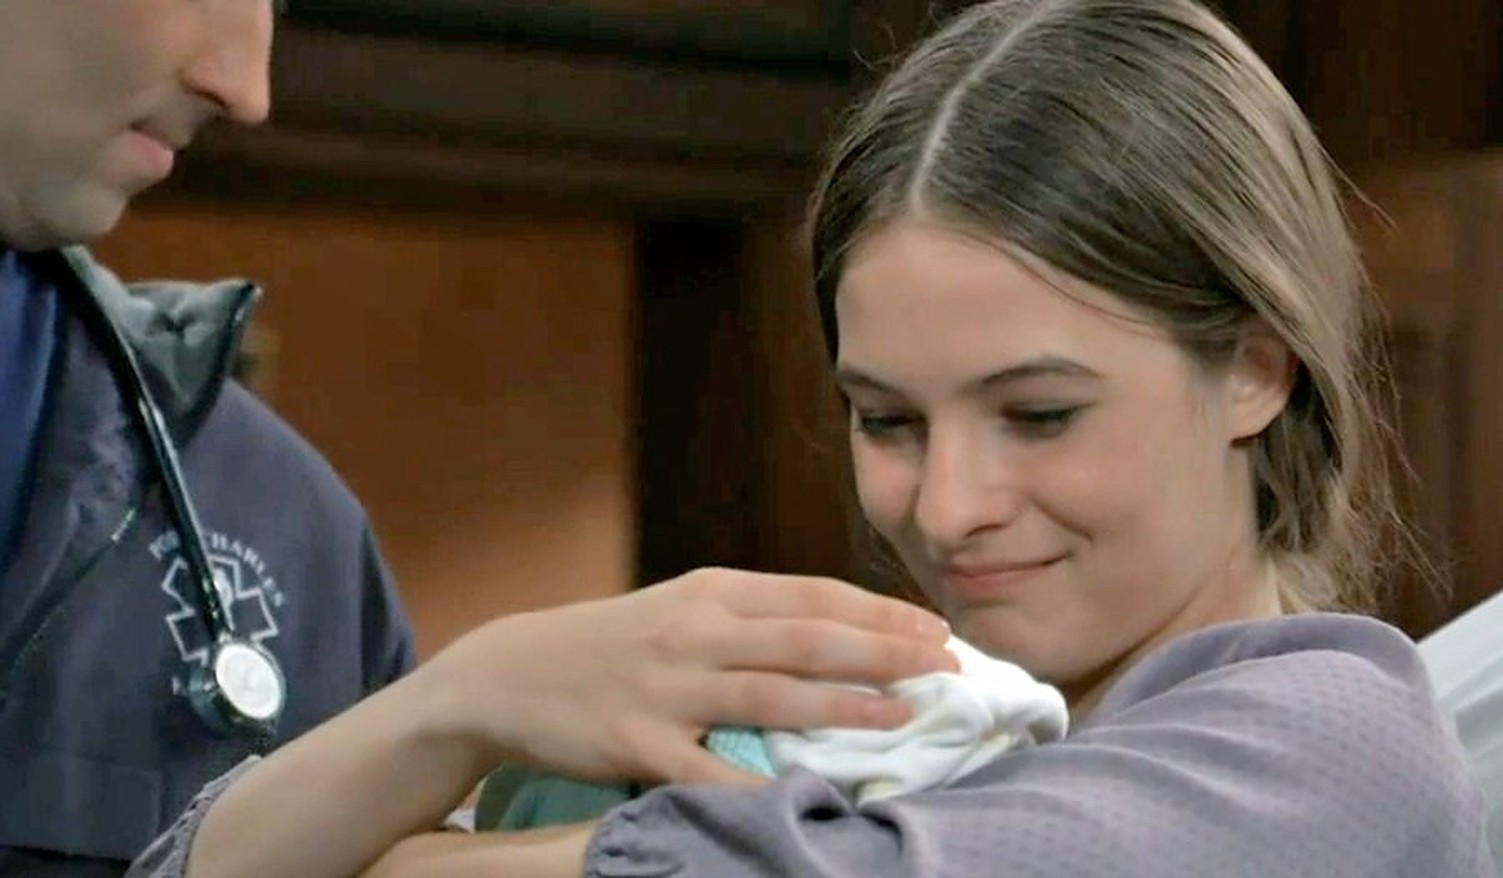 GH/Will Esme's (Avery Kristen Pohl) character have a change of heart in the soap?